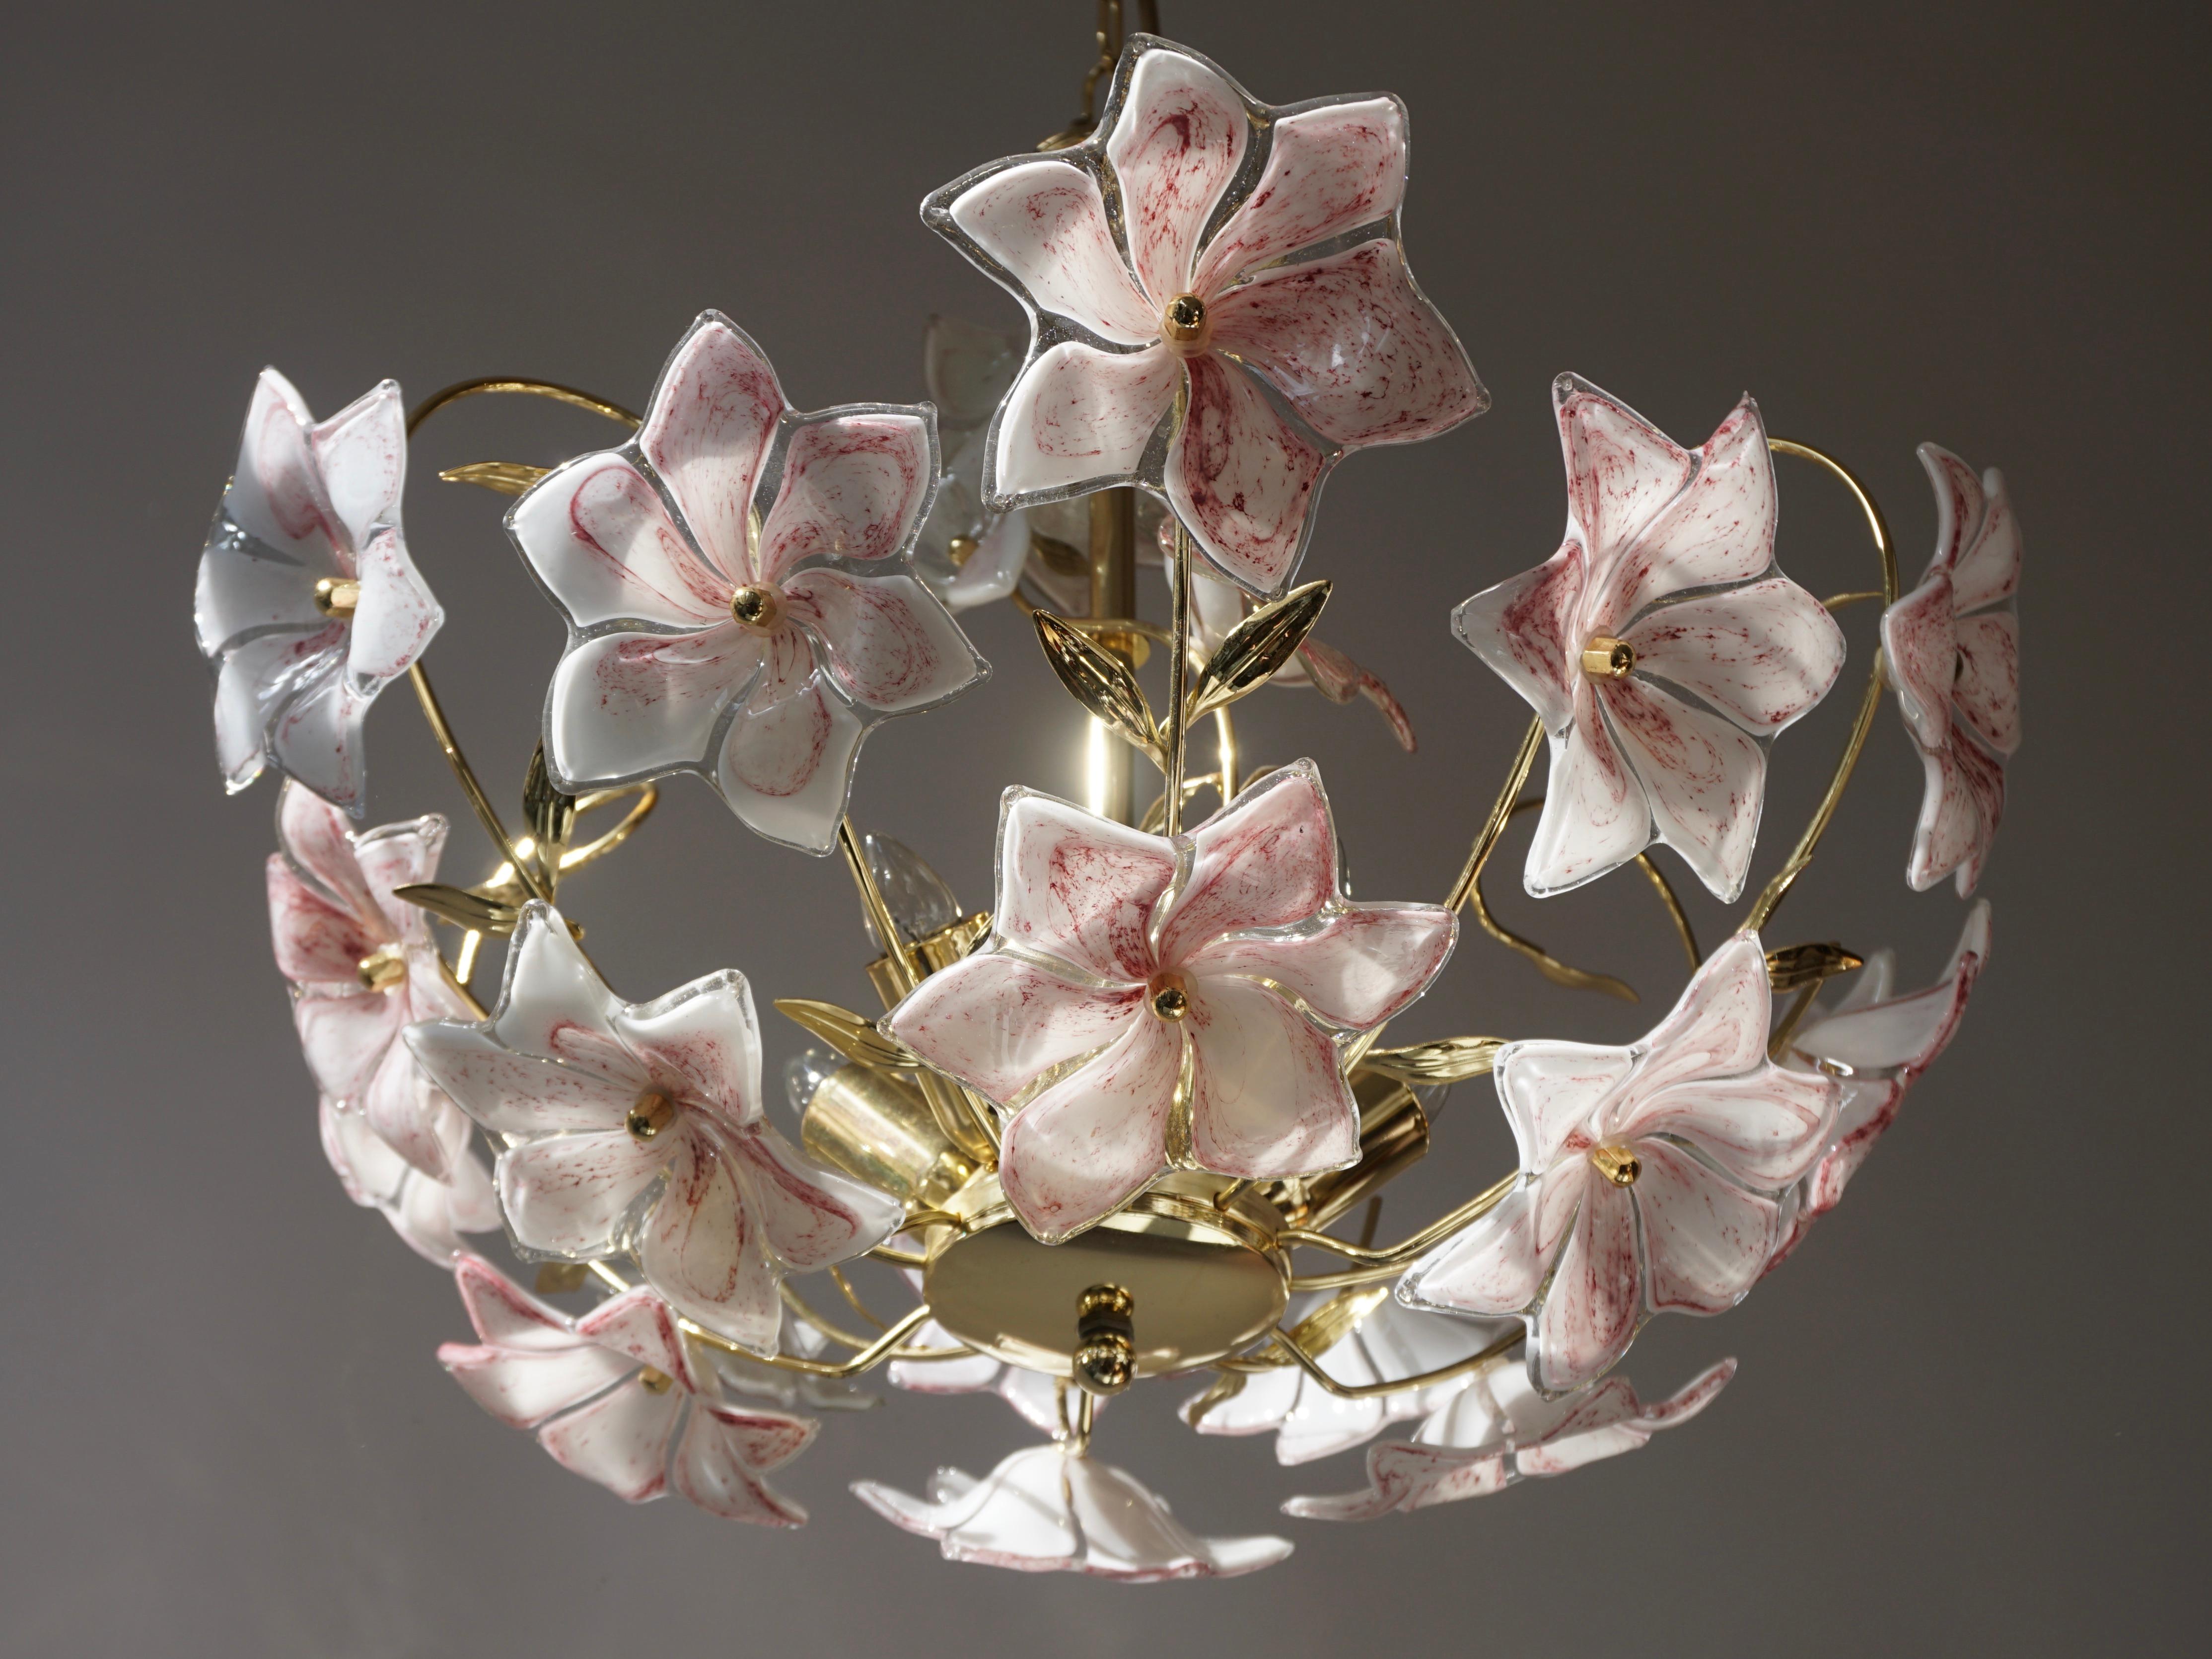 20th Century Italian Brass Chandelier with White Pink Colored Murano Glass Flowers